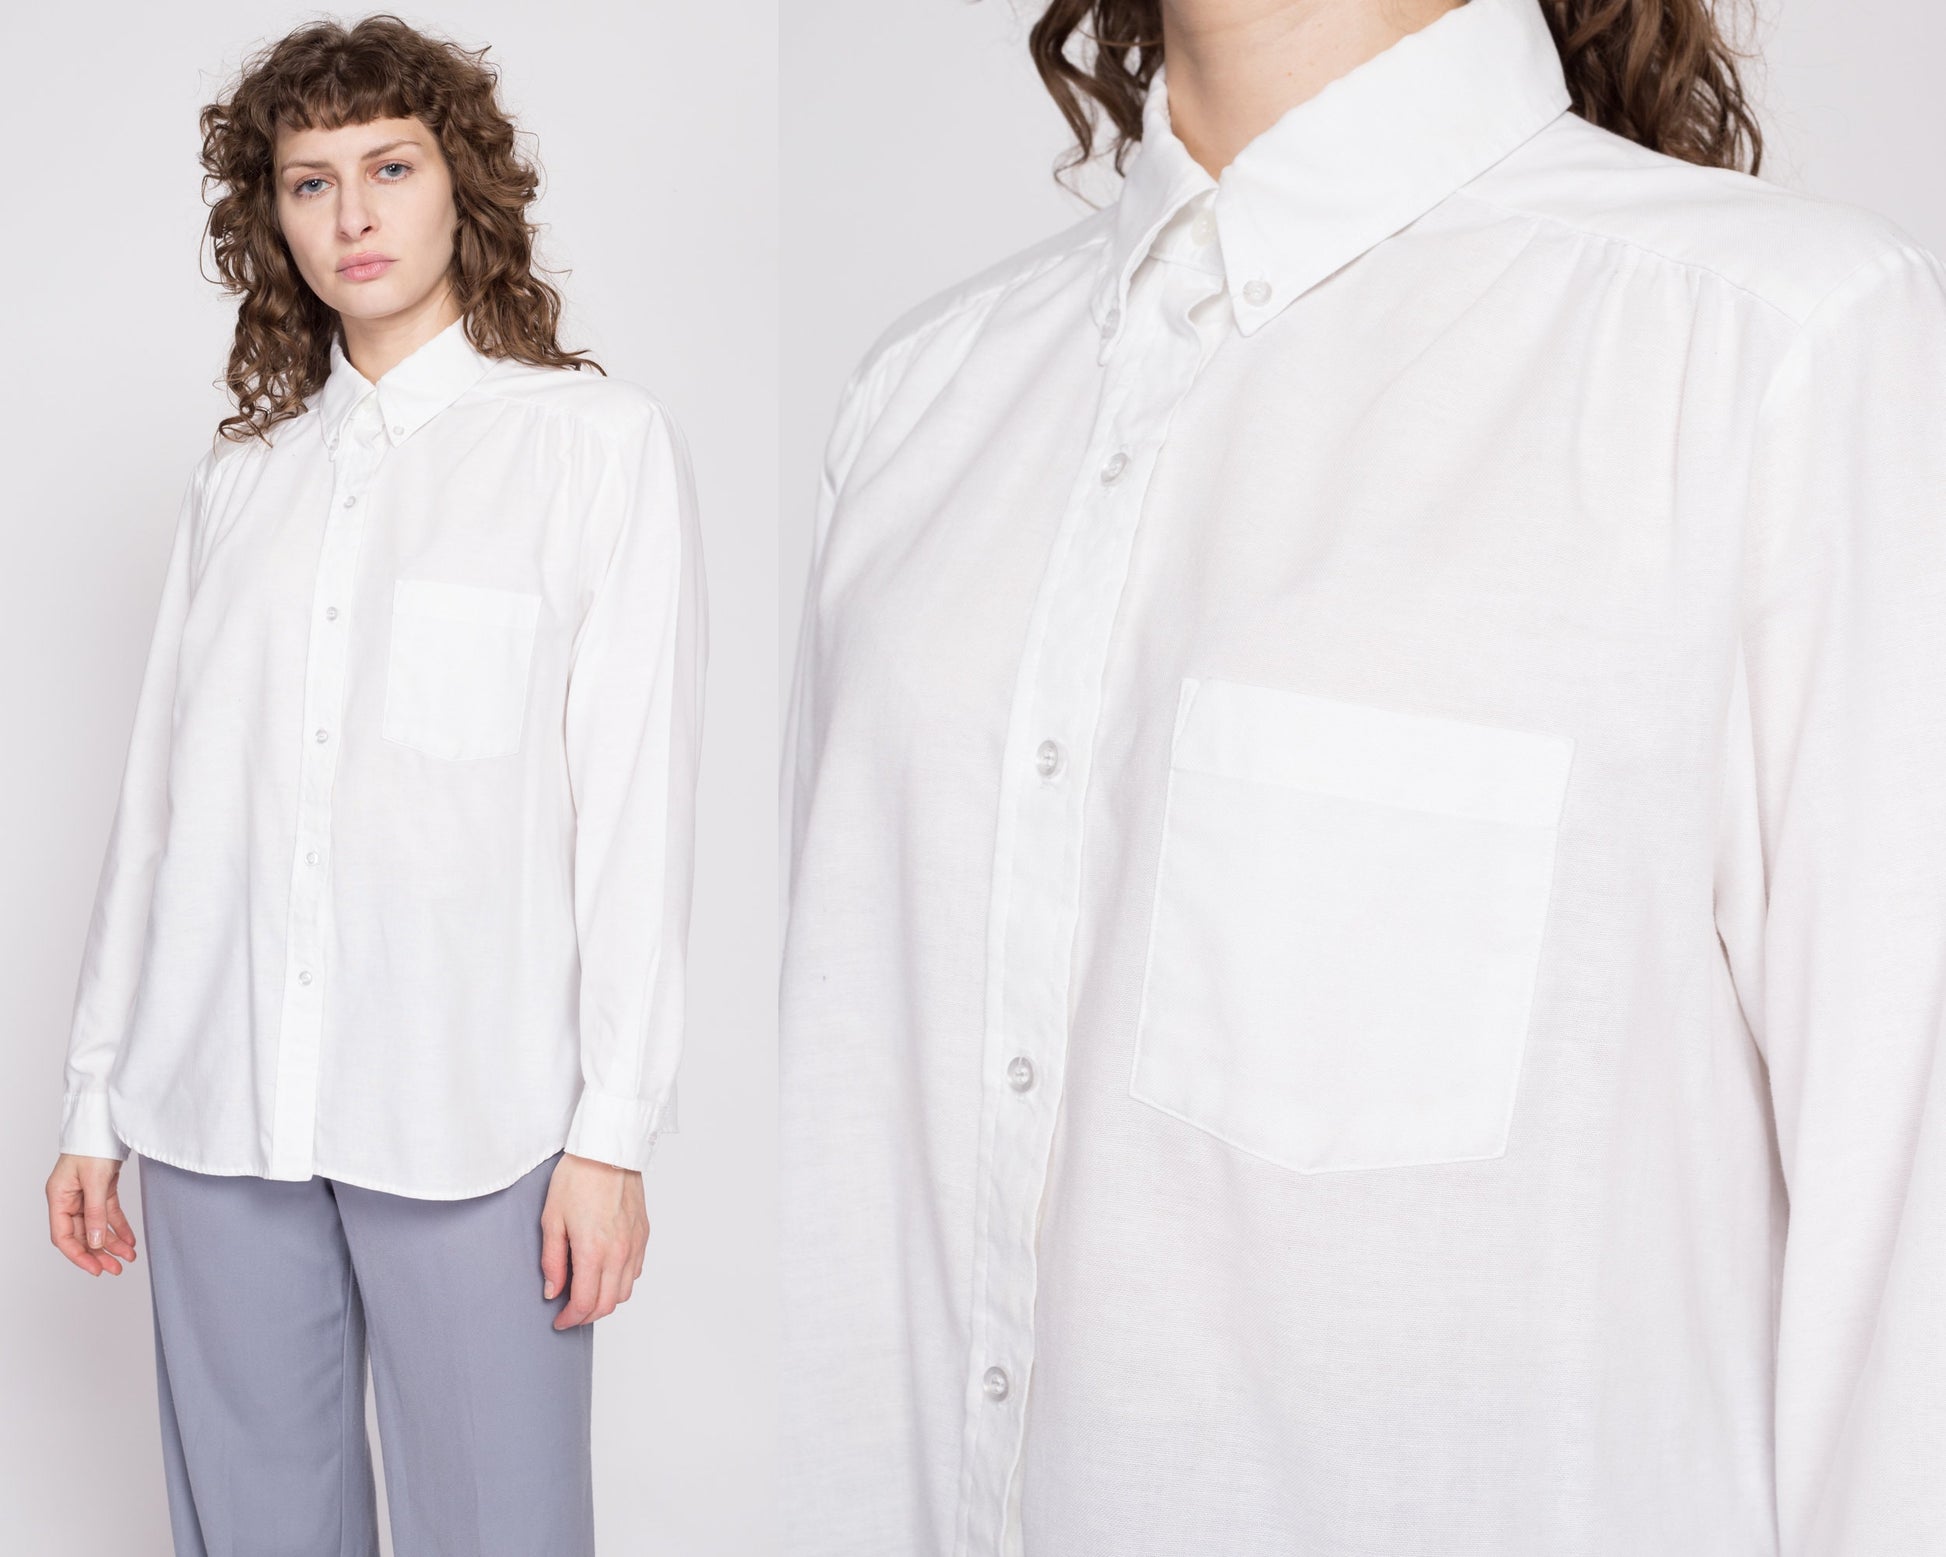 80s Minimalist White Button Up Shirt - Extra Large | Vintage Cotton Blend Long Sleeve Collared Top